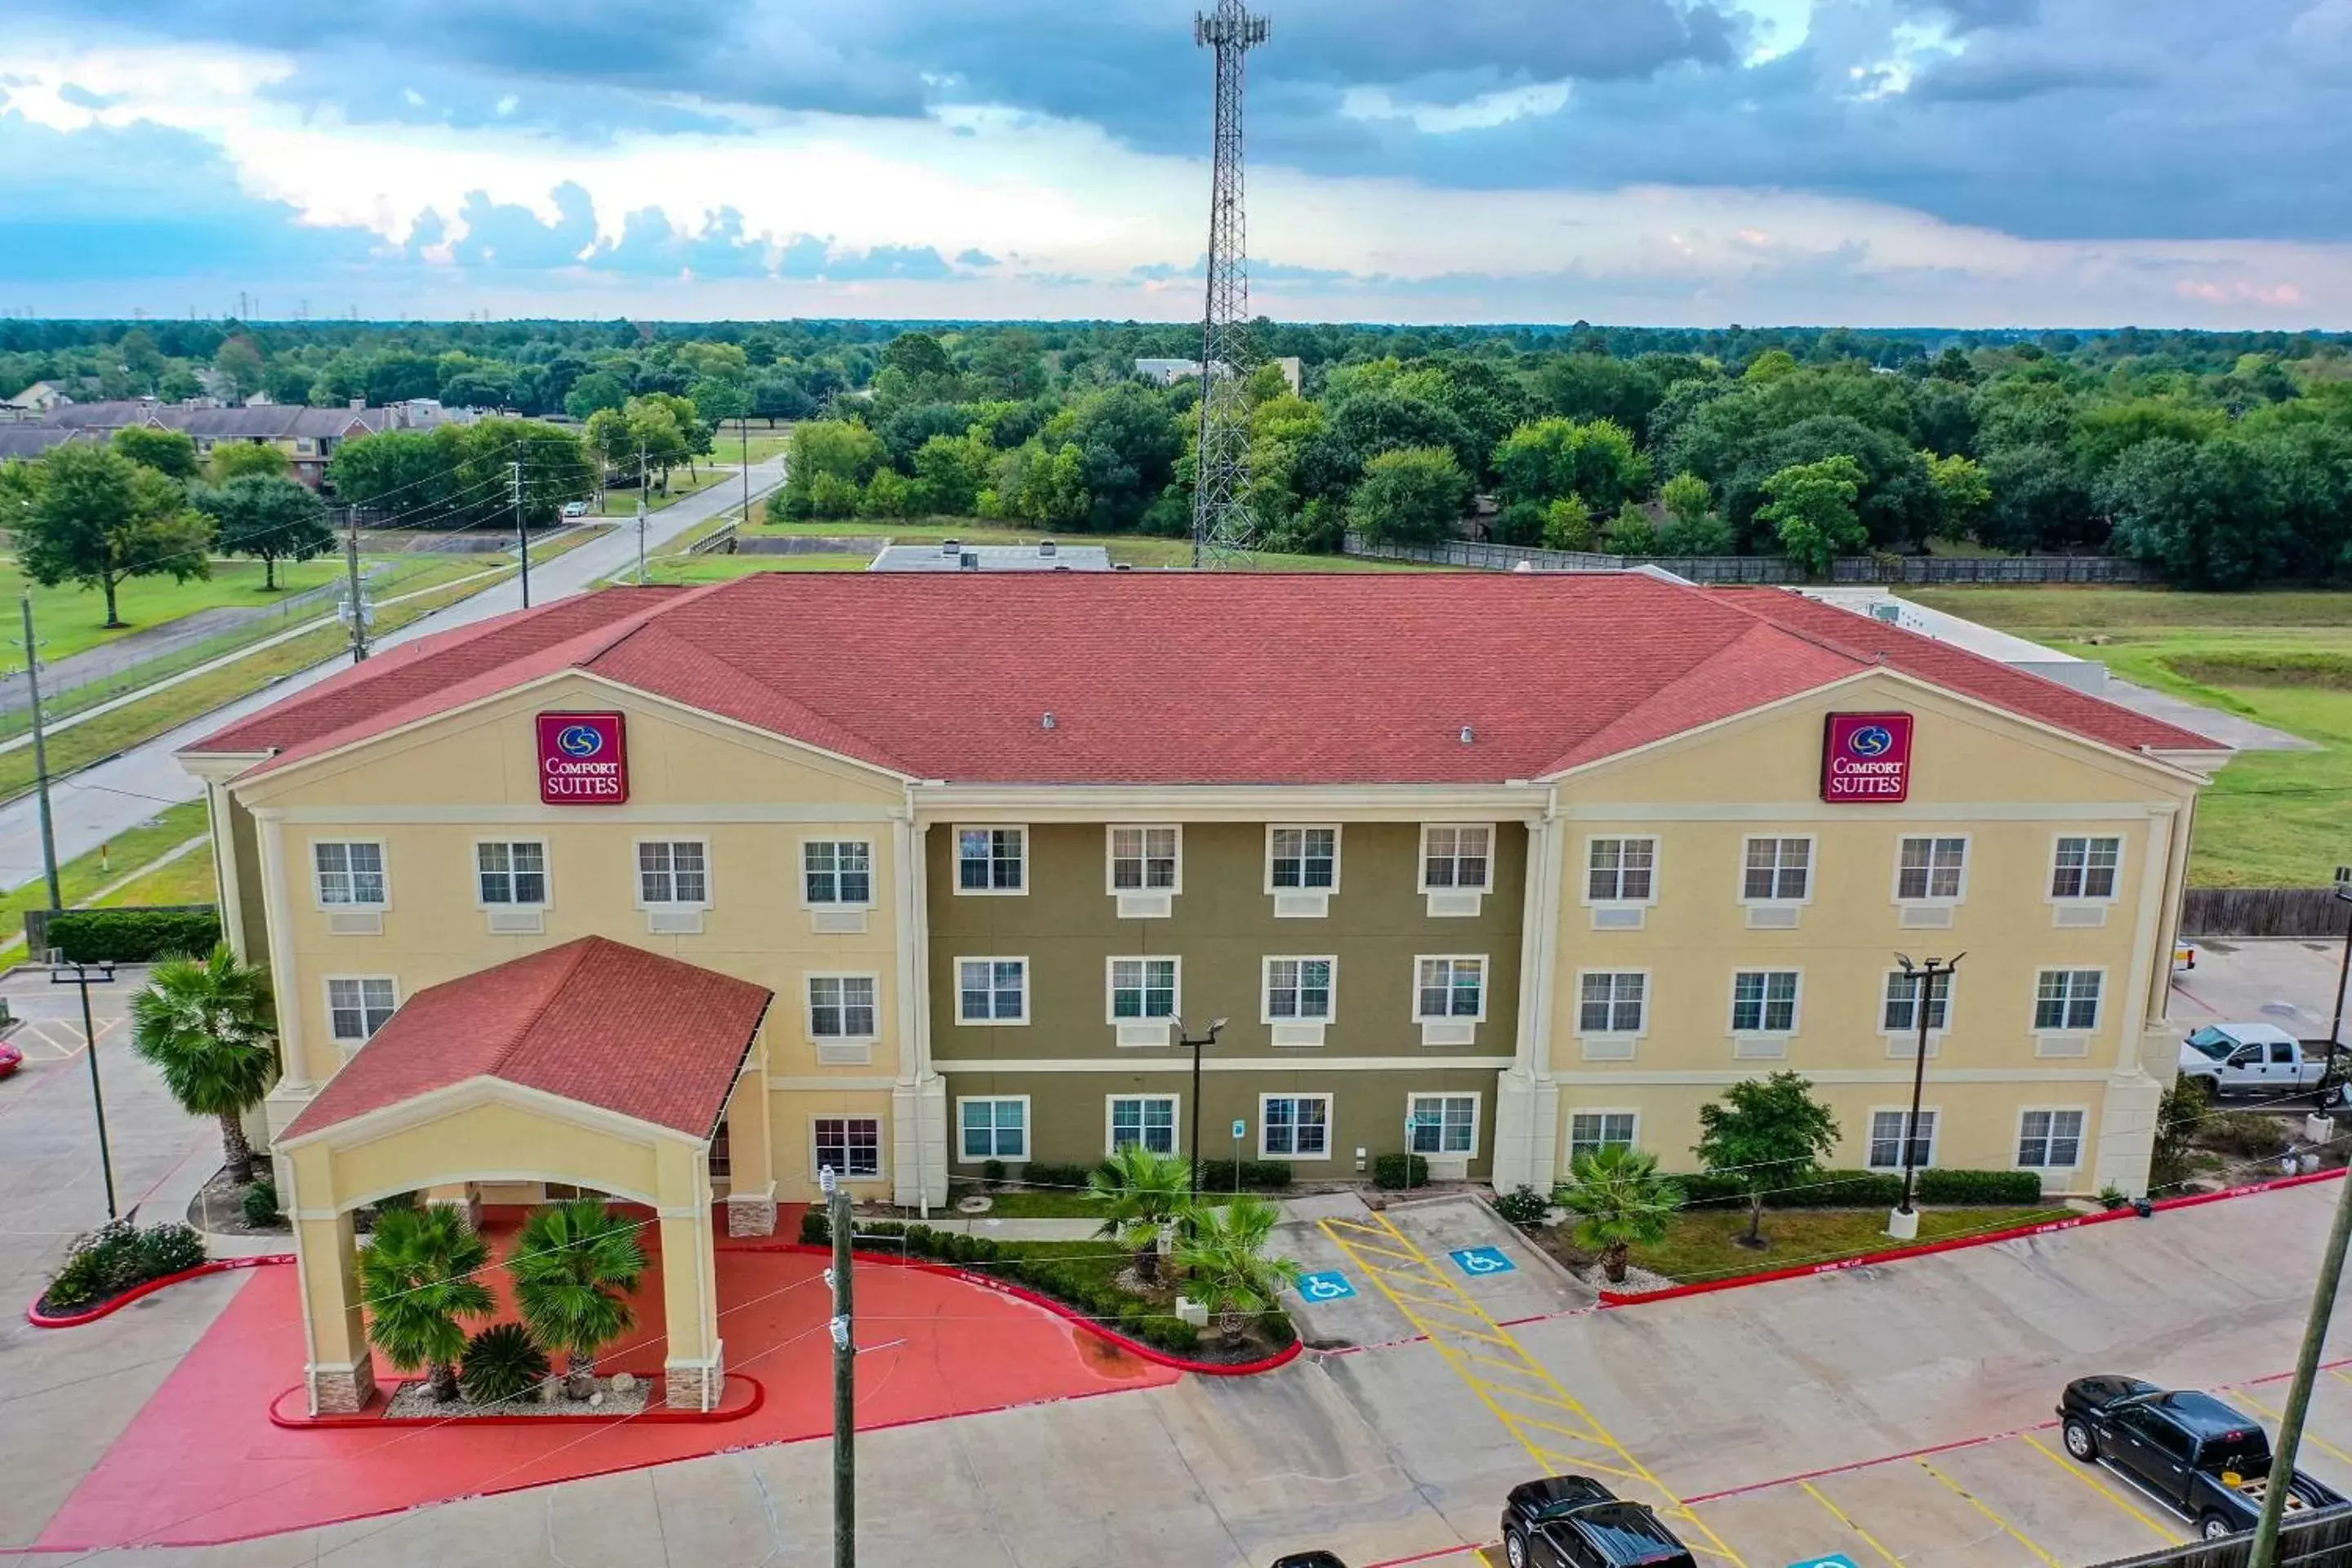 Property building, Bird's-eye View in Comfort Suites Tomball Medical Center